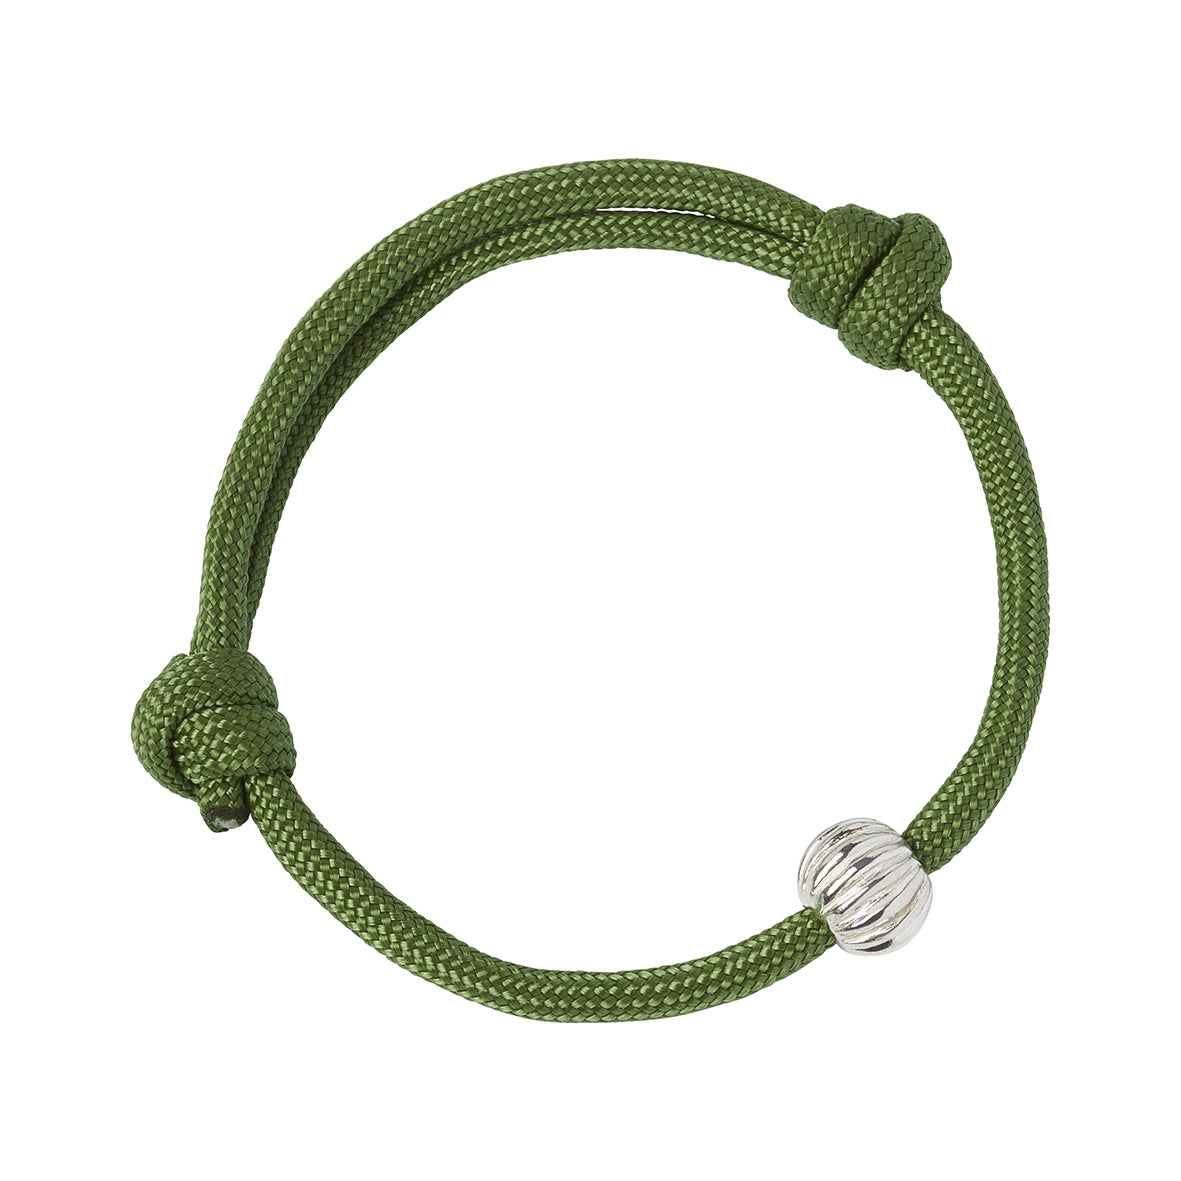 A forest green adjustable paracord bracelet with a sterling silver bead with grooves as inspired by the Roman Melon Beads found at Corstopitum Corbridge Roman site in Northumberland